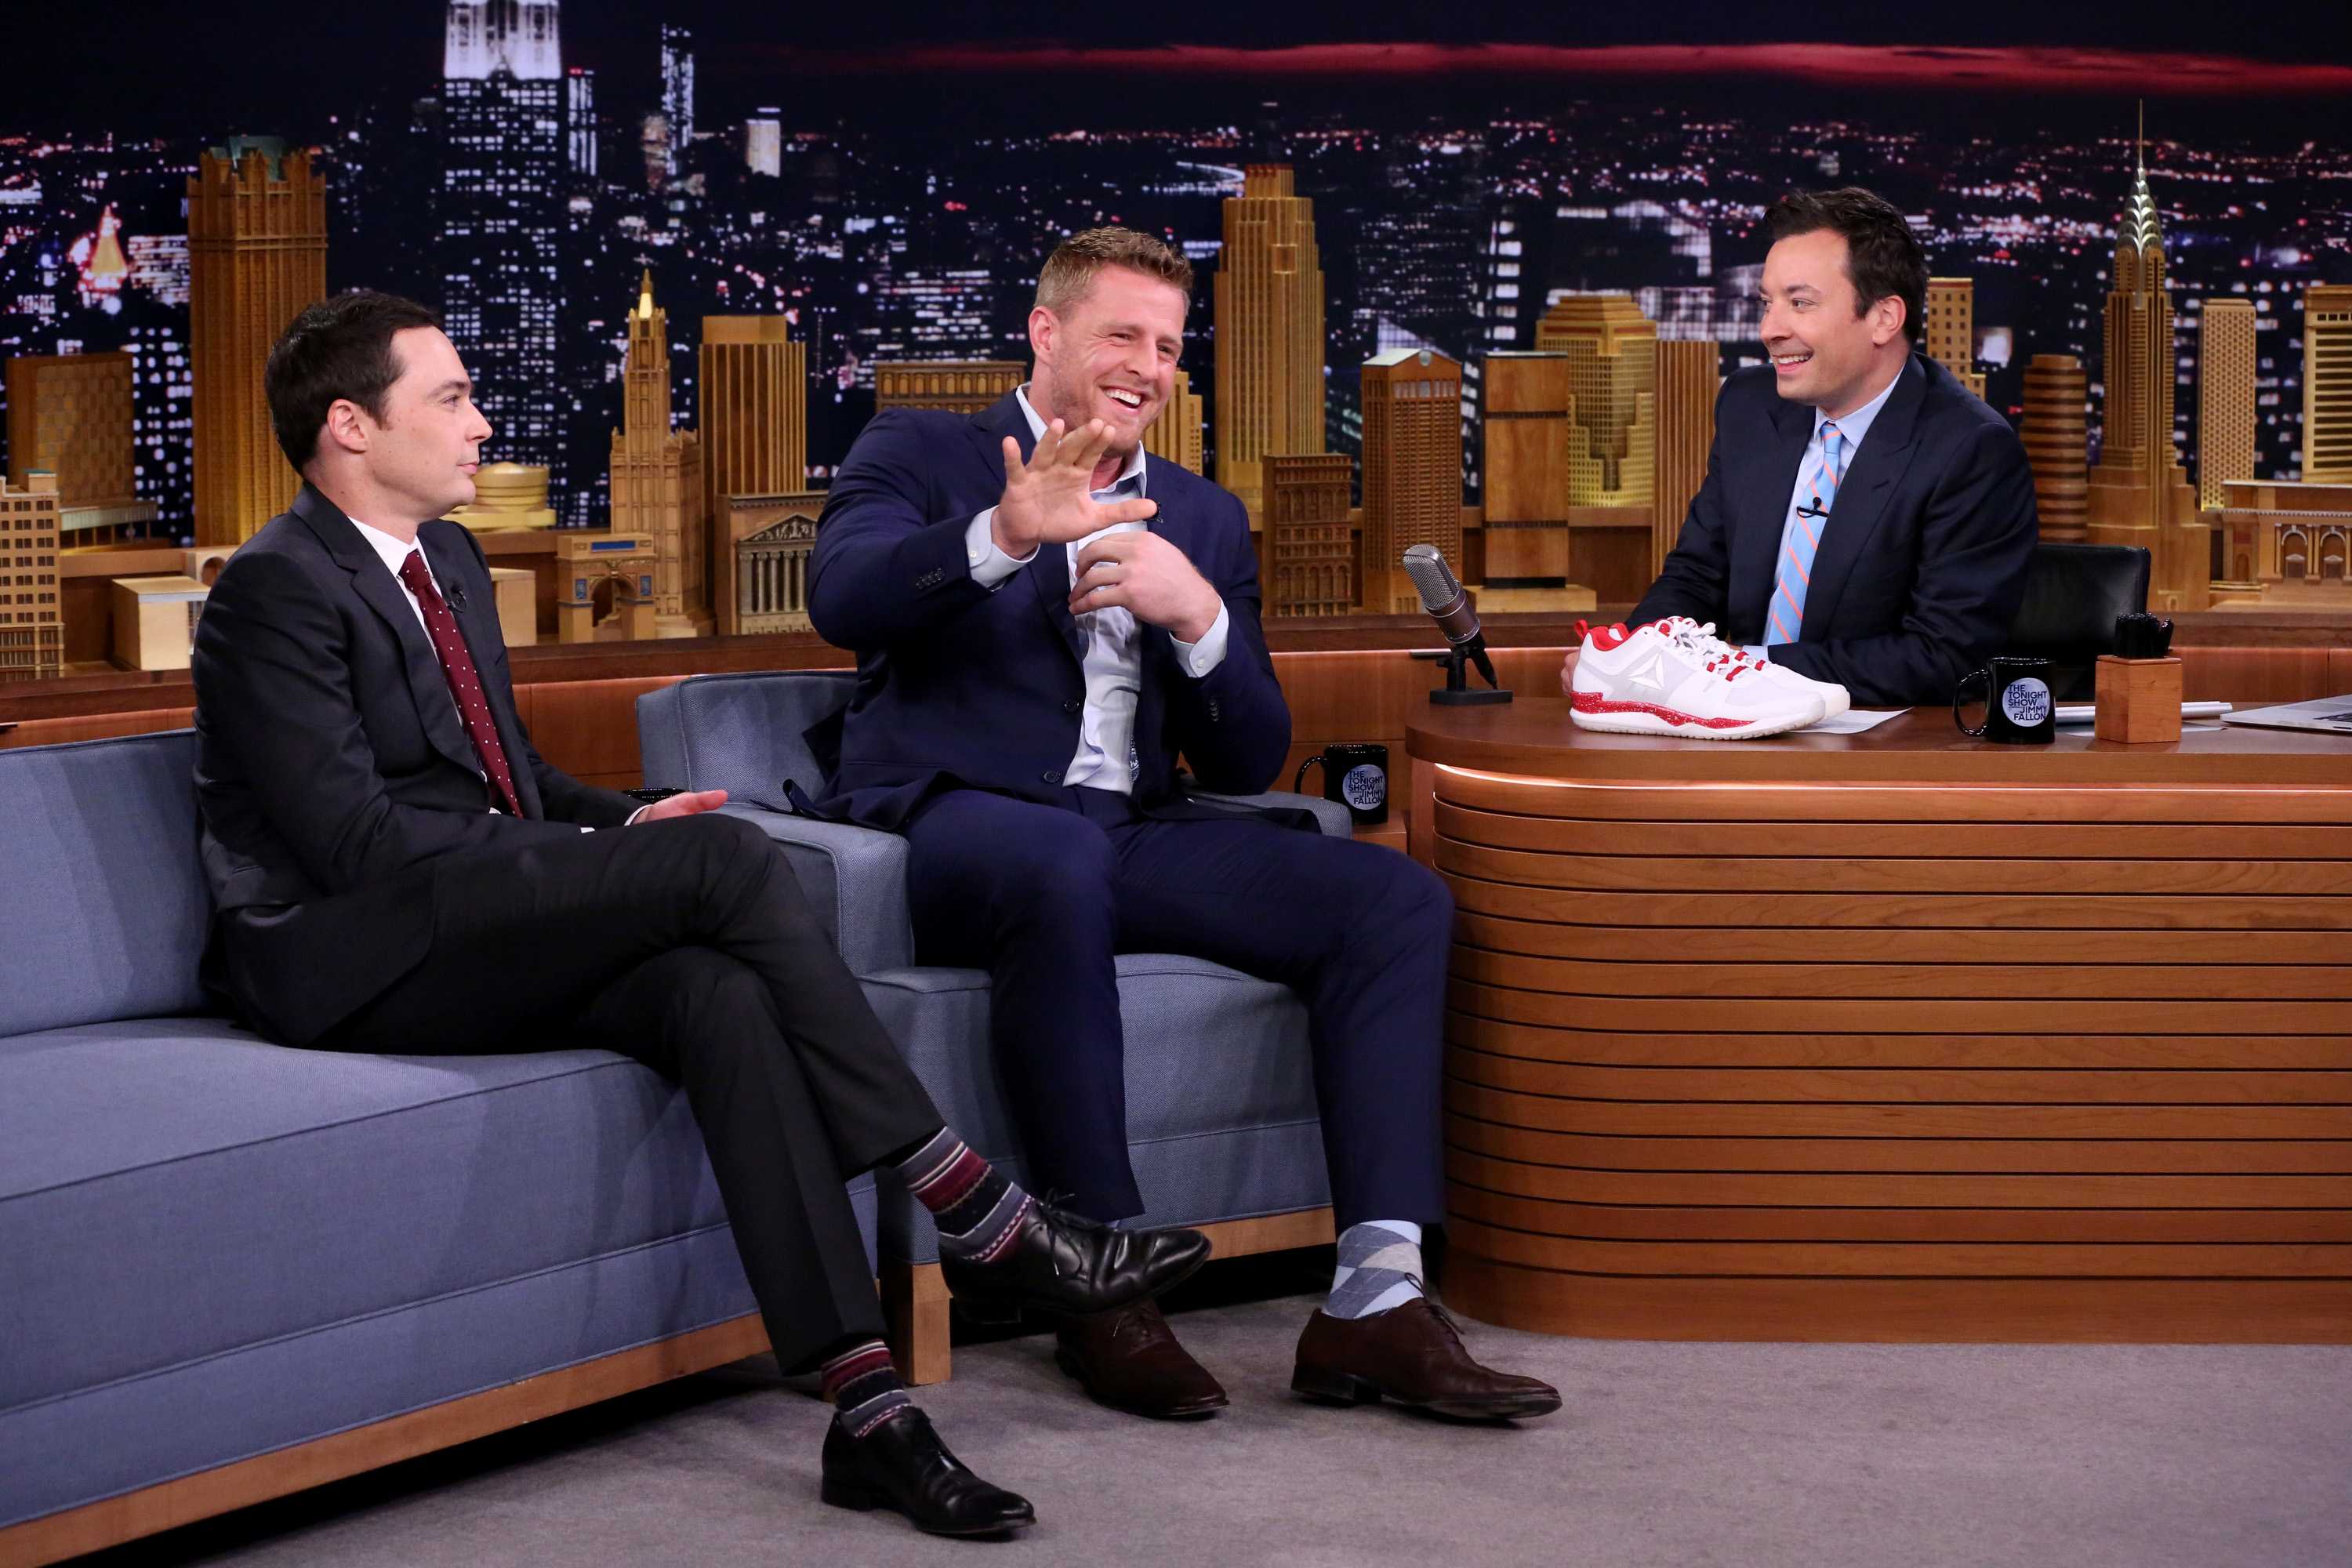 Jimmy Fallon Used Rob Gronkowski and Other NFL Players to Sabotage NFL Interviews